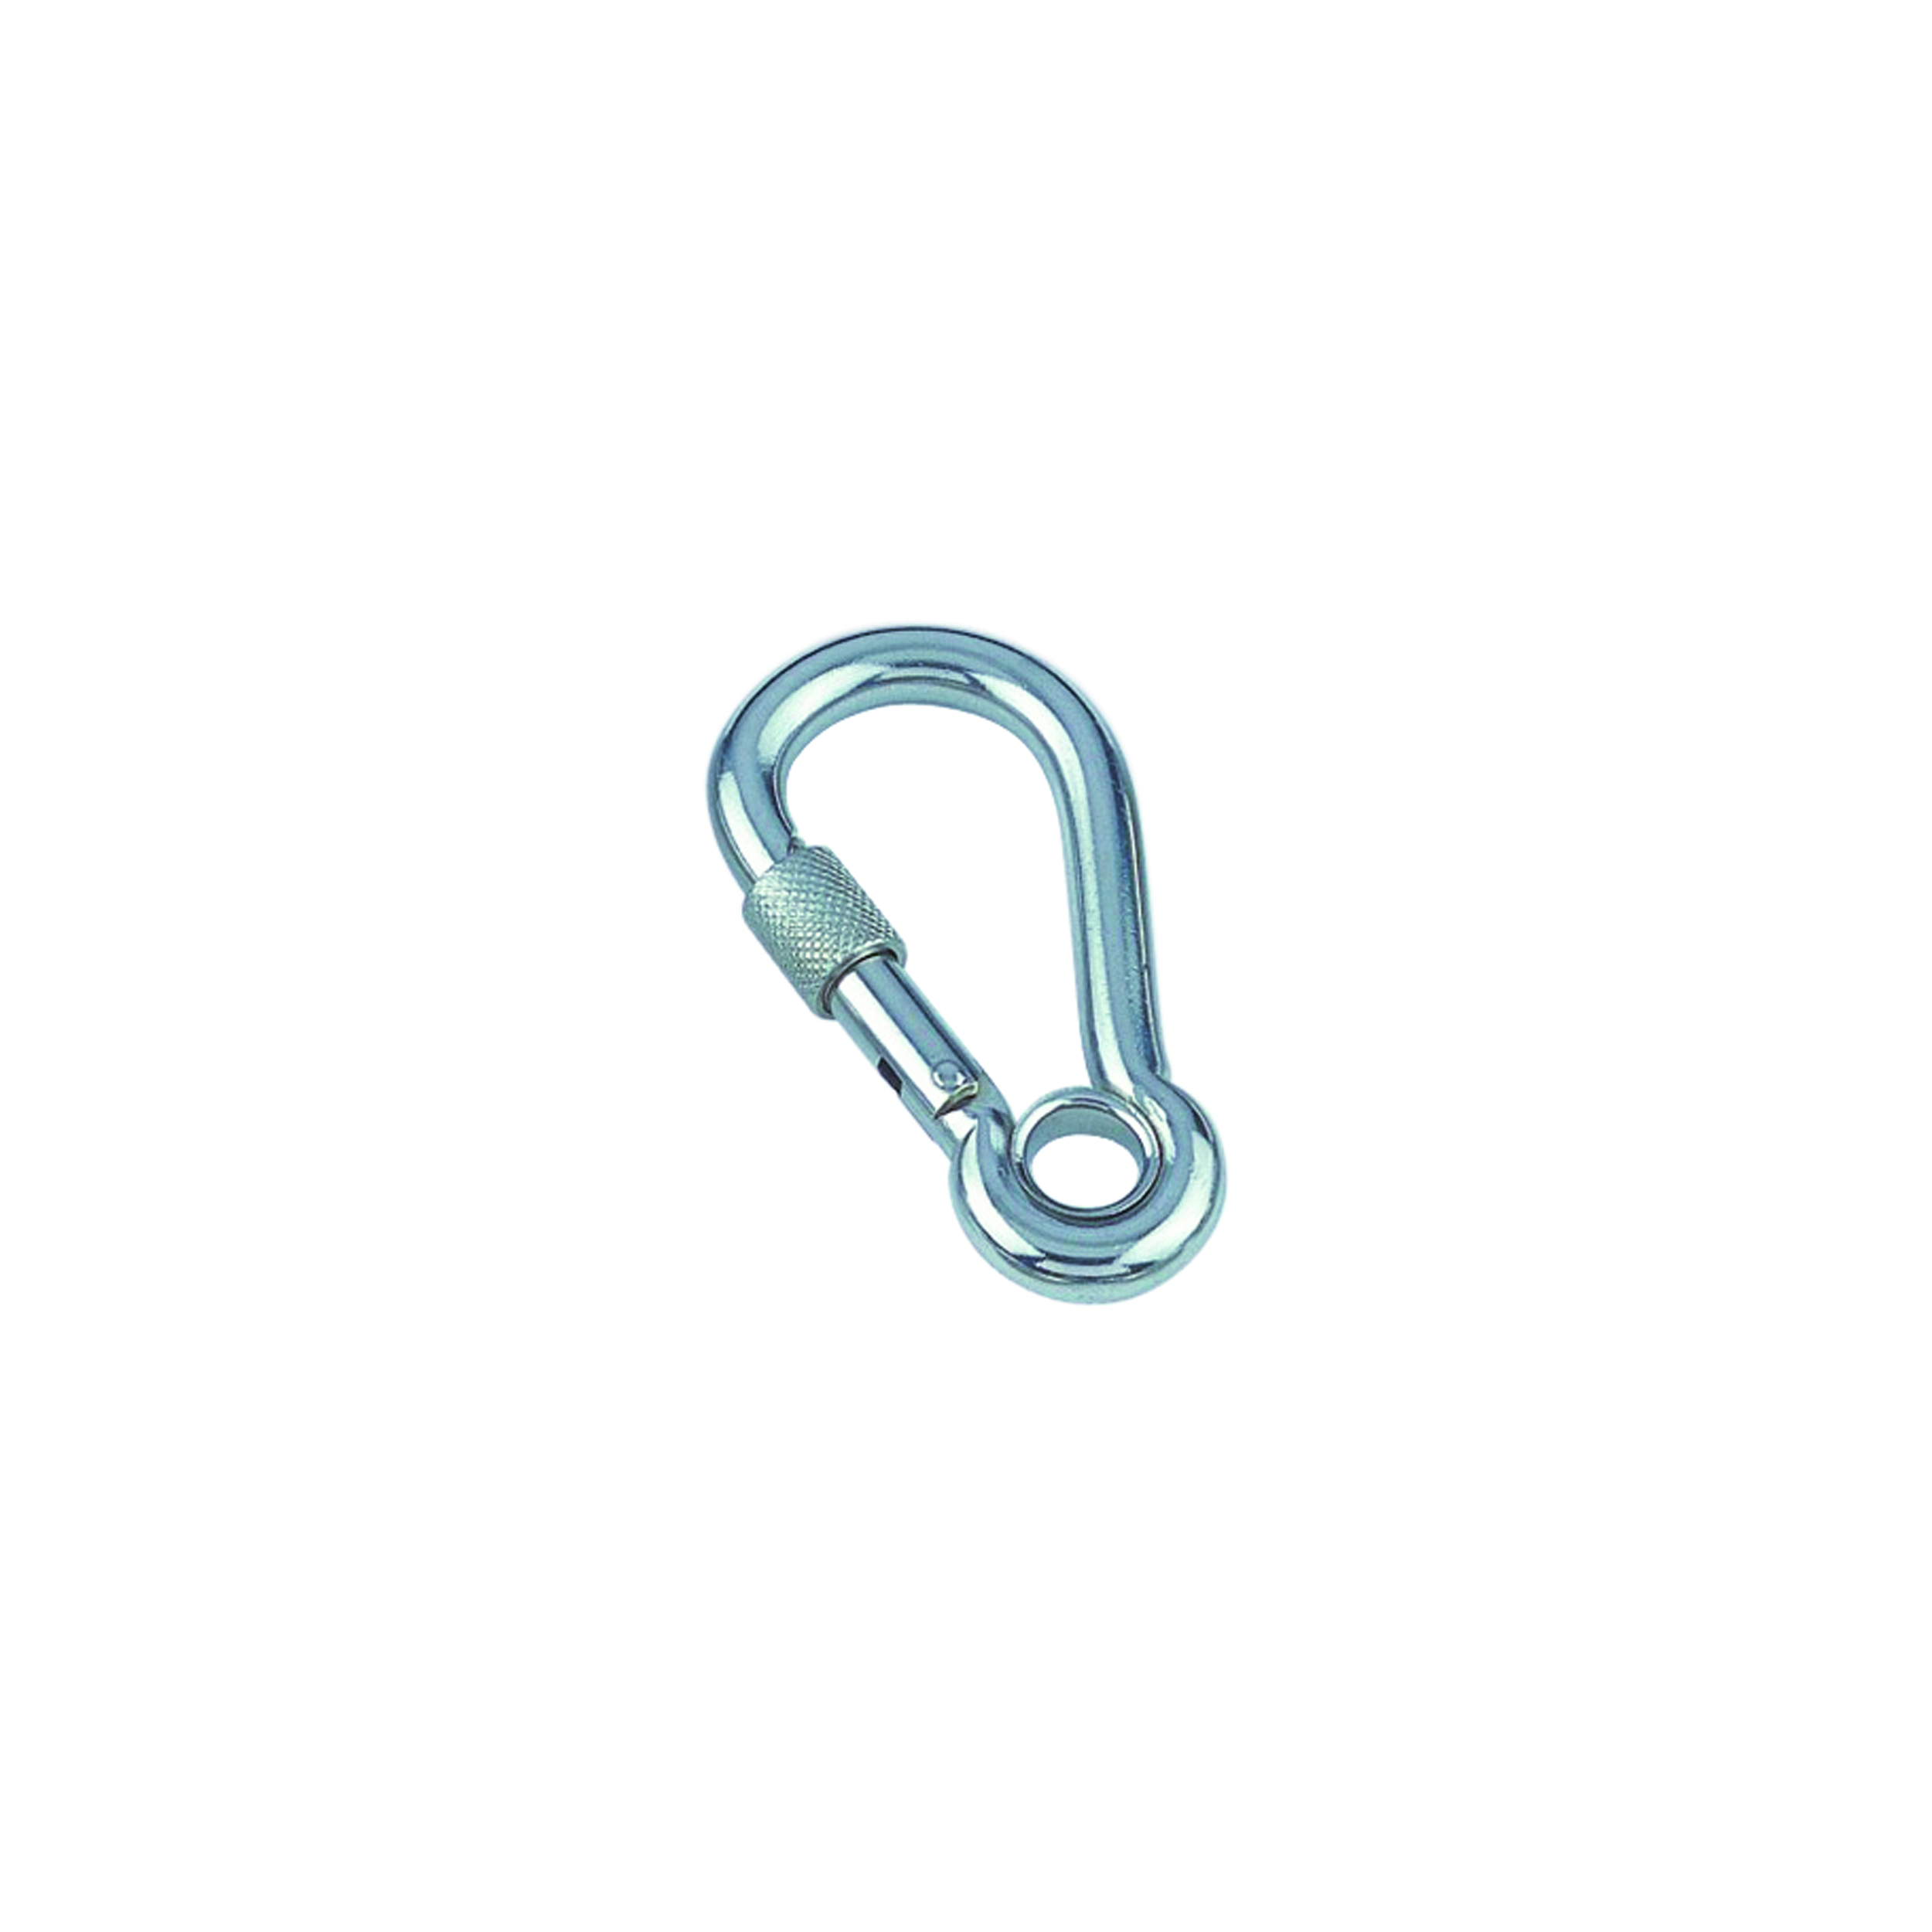 10 STCK / PCS. Spring hook with screw sleeve and eyelet A4  8x80mm